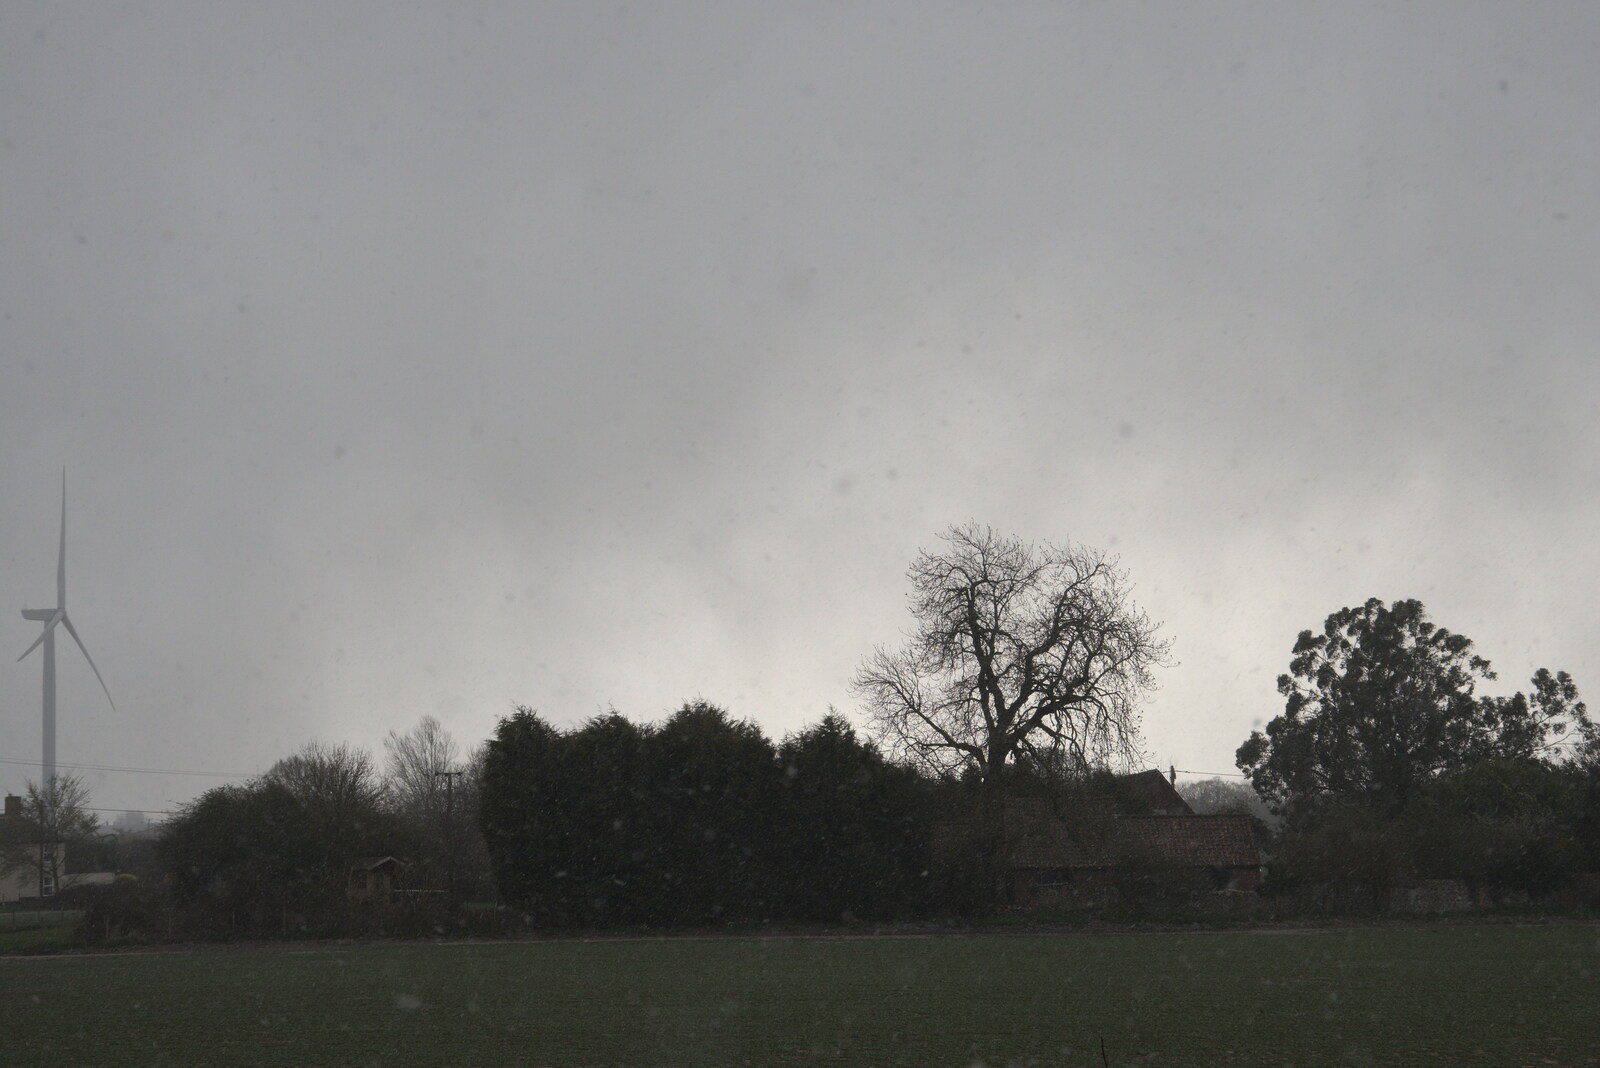 Snow drifts over the side field from Roadworks and Harry's Trampoline, Brome, Suffolk - 6th April 2021